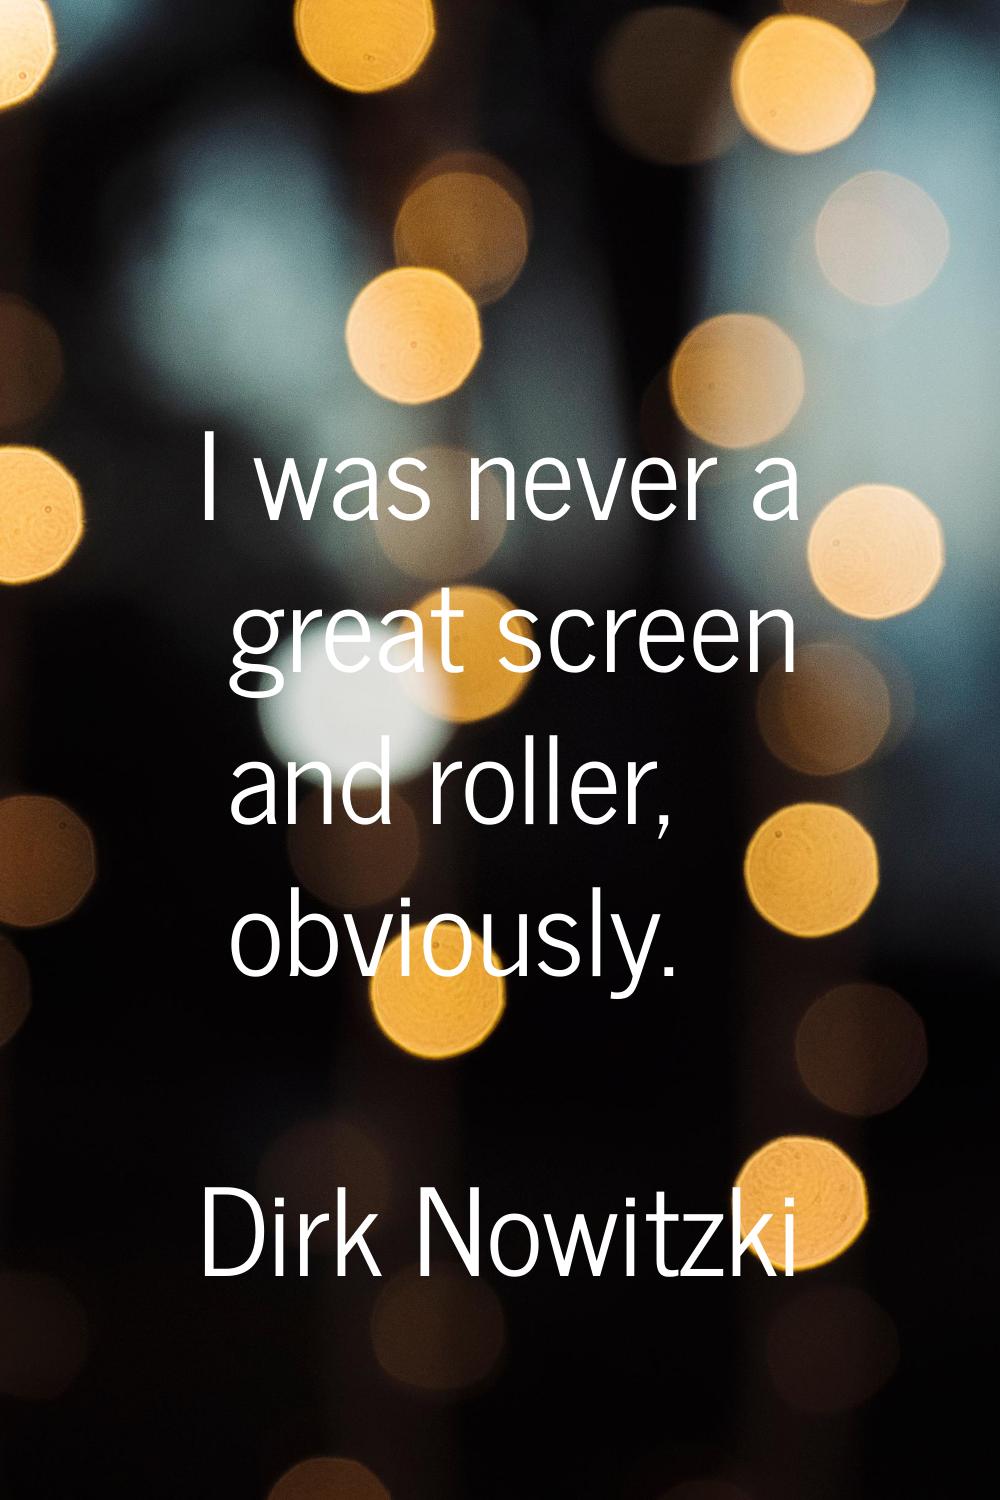 I was never a great screen and roller, obviously.